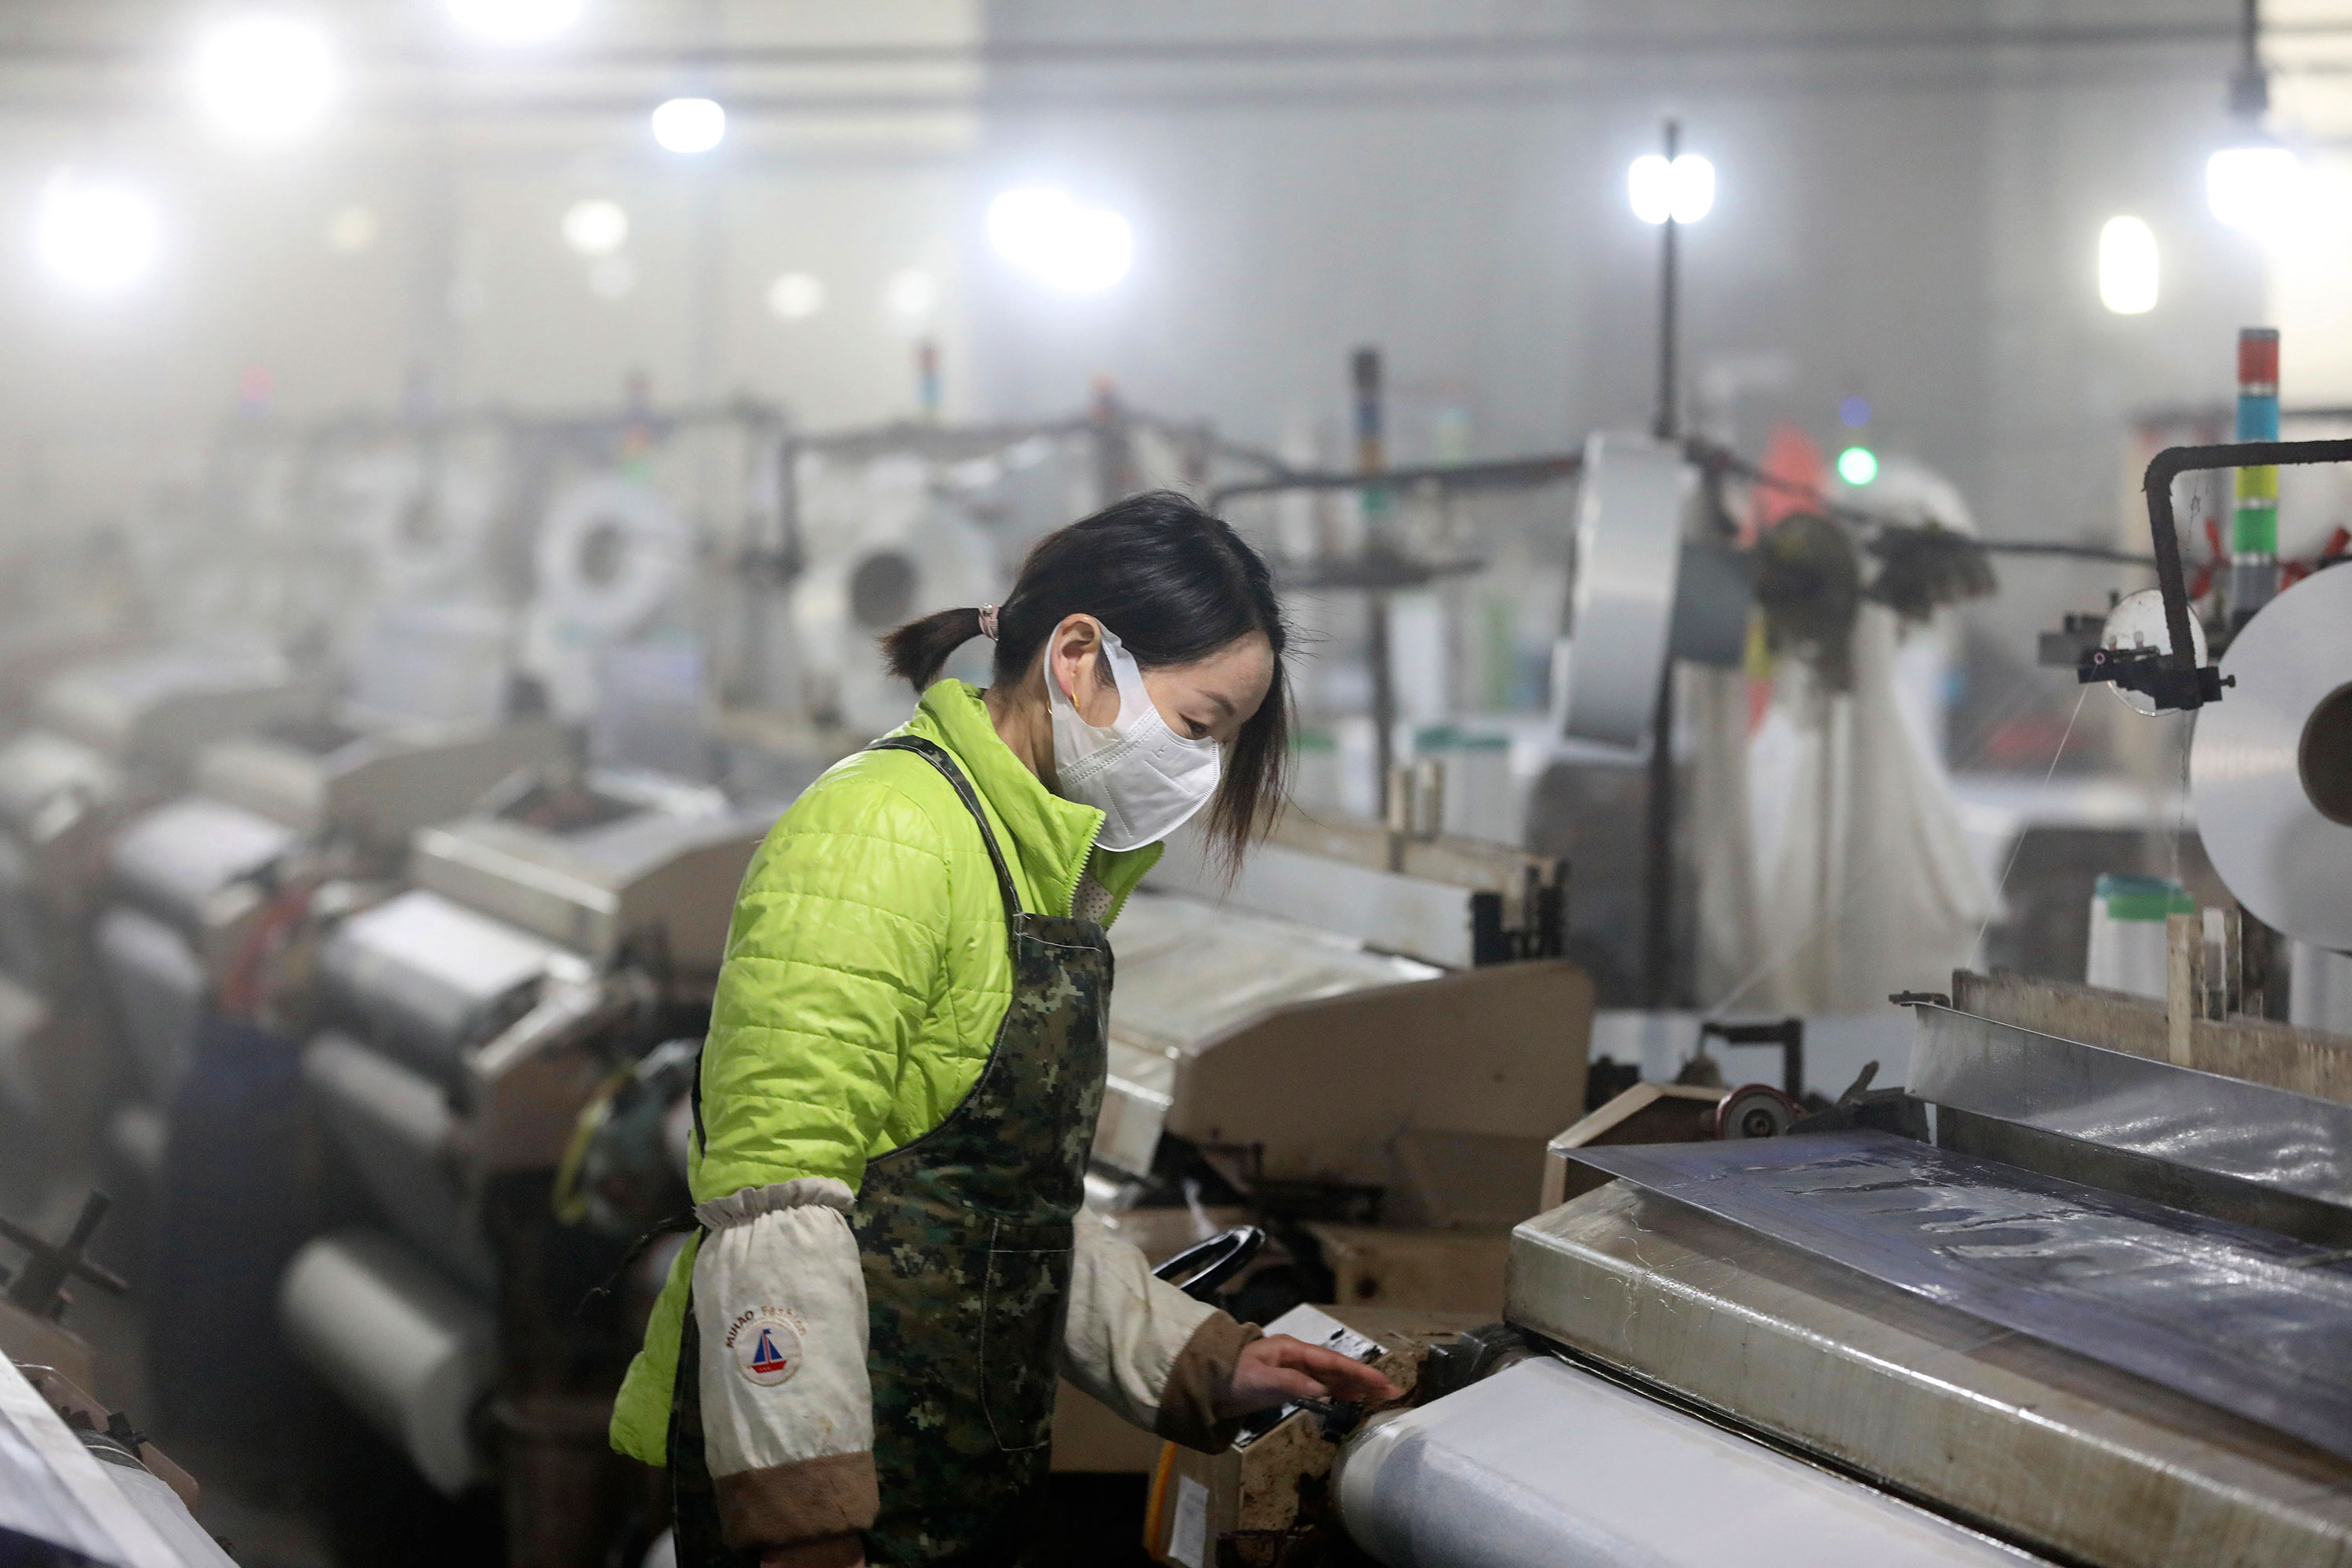 A woman works at a textile factory in Hangzhou, China on February 27.